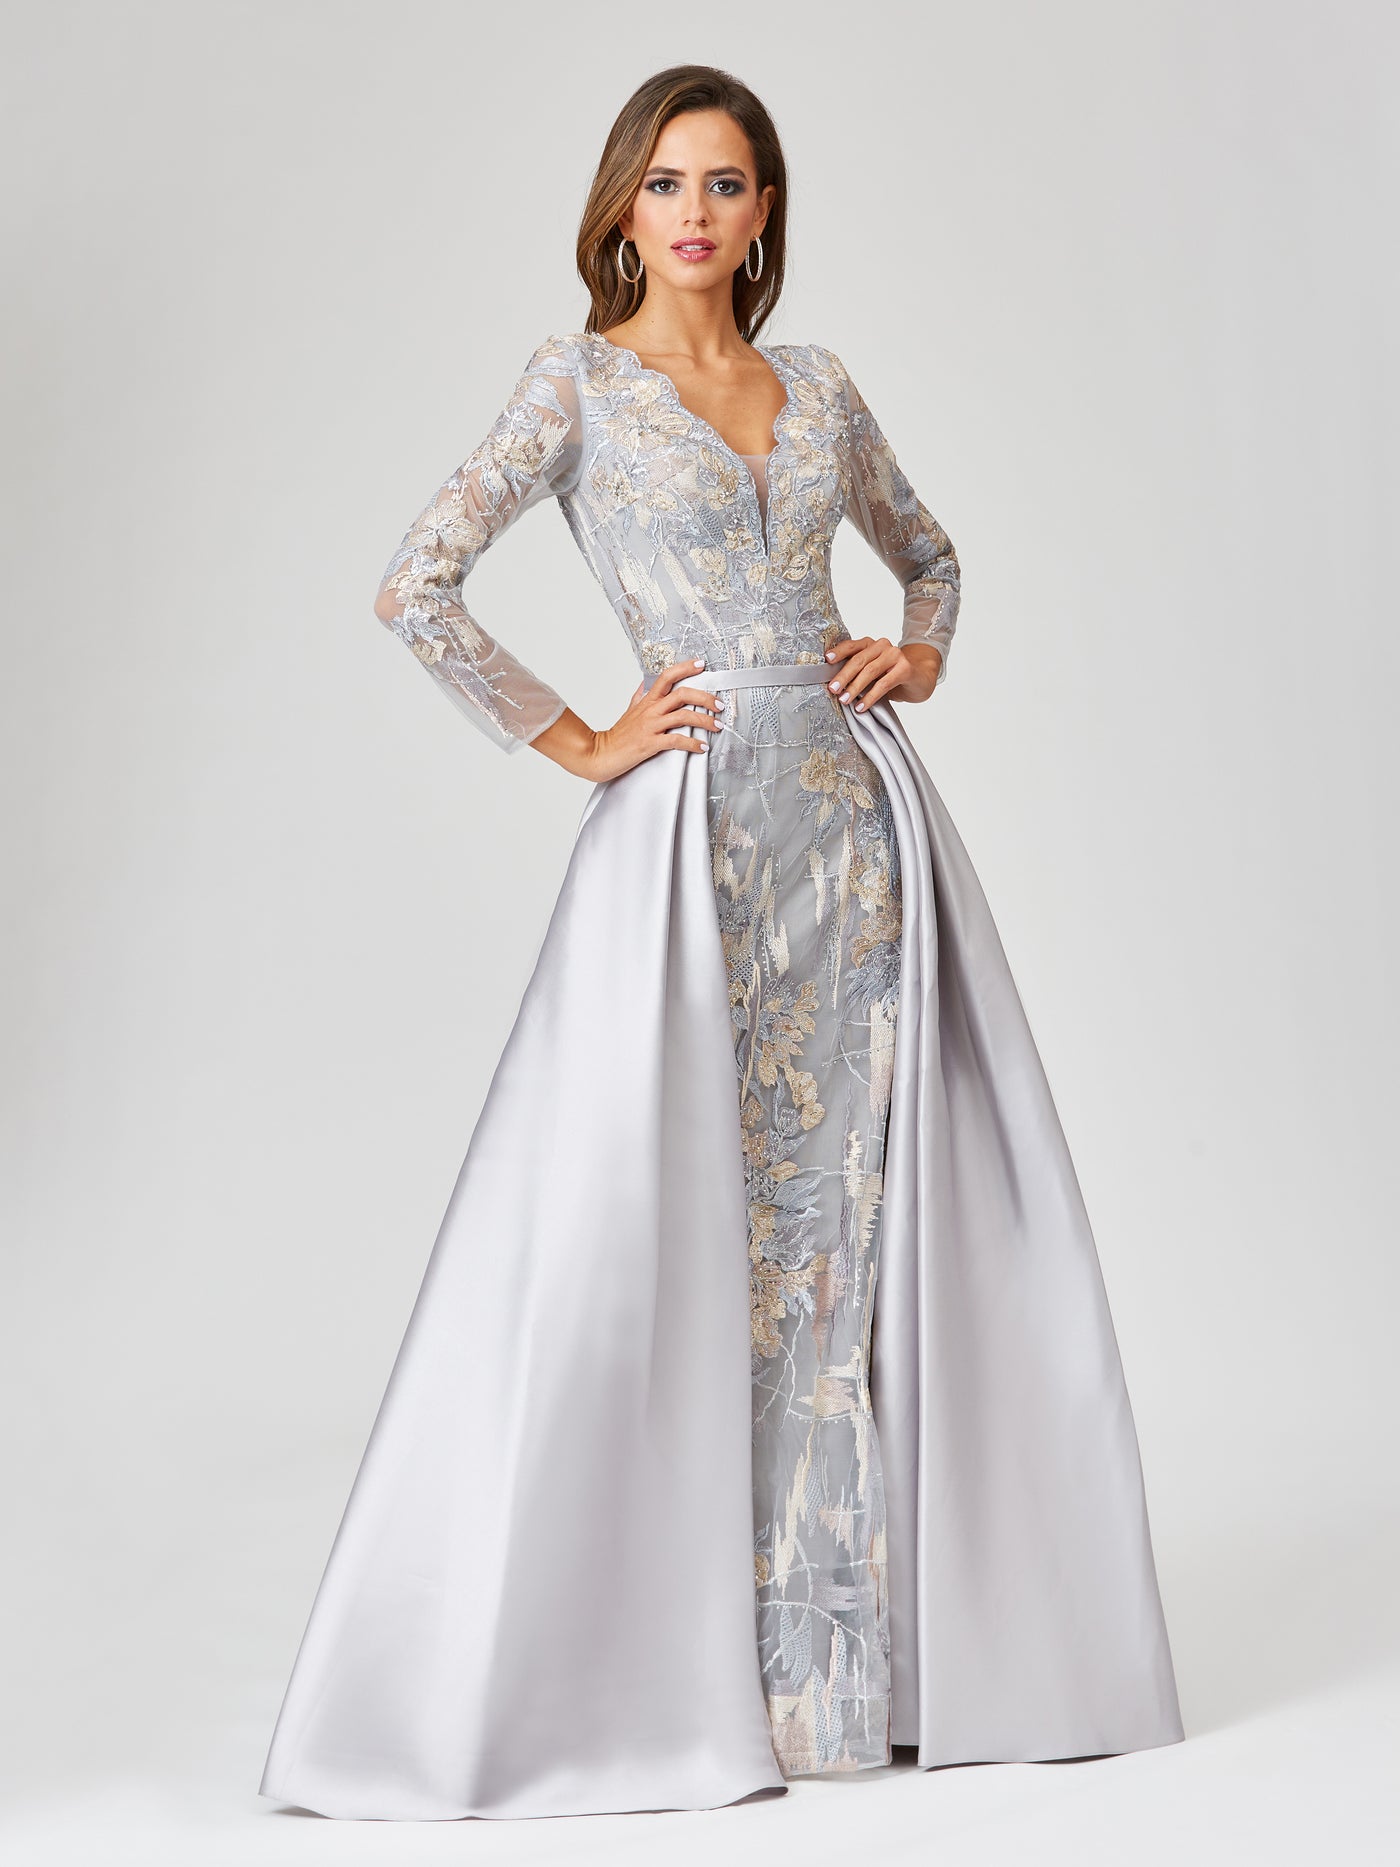 Lara 29468 - Long Sleeve Lace Gown with Removable Over Skirt